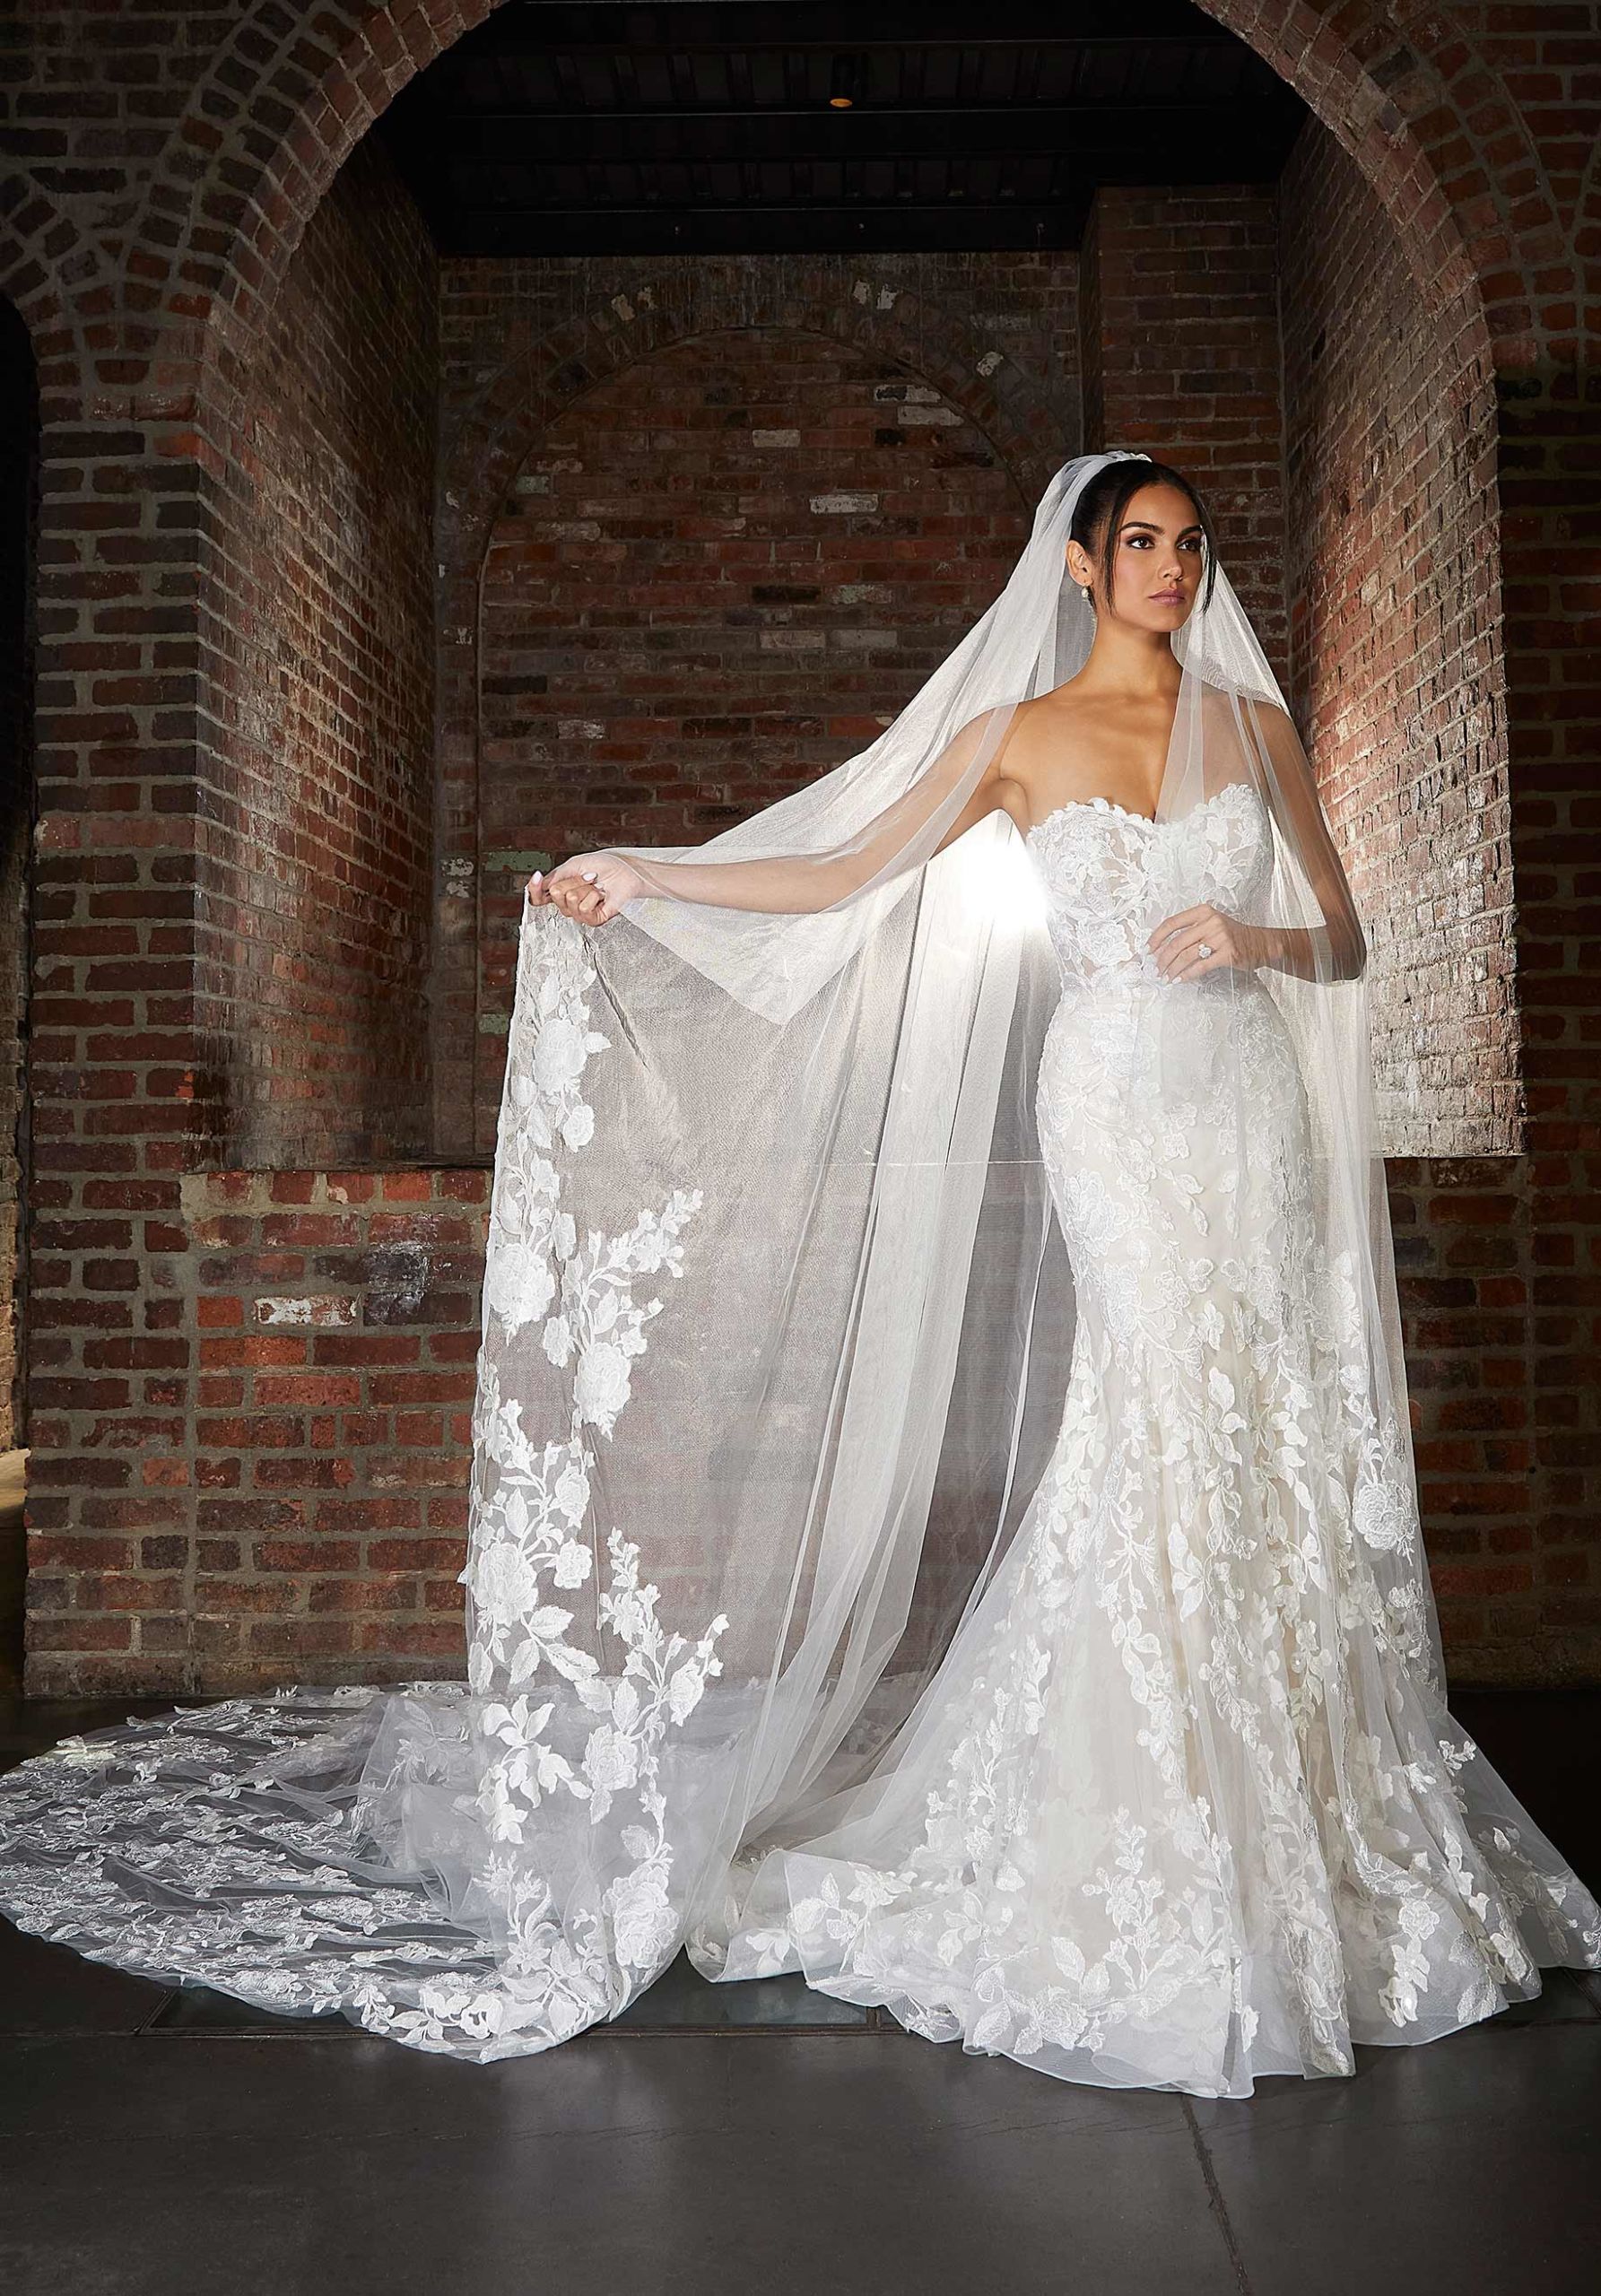 Cathedral Length Veil with Frosted Lace Appliqués